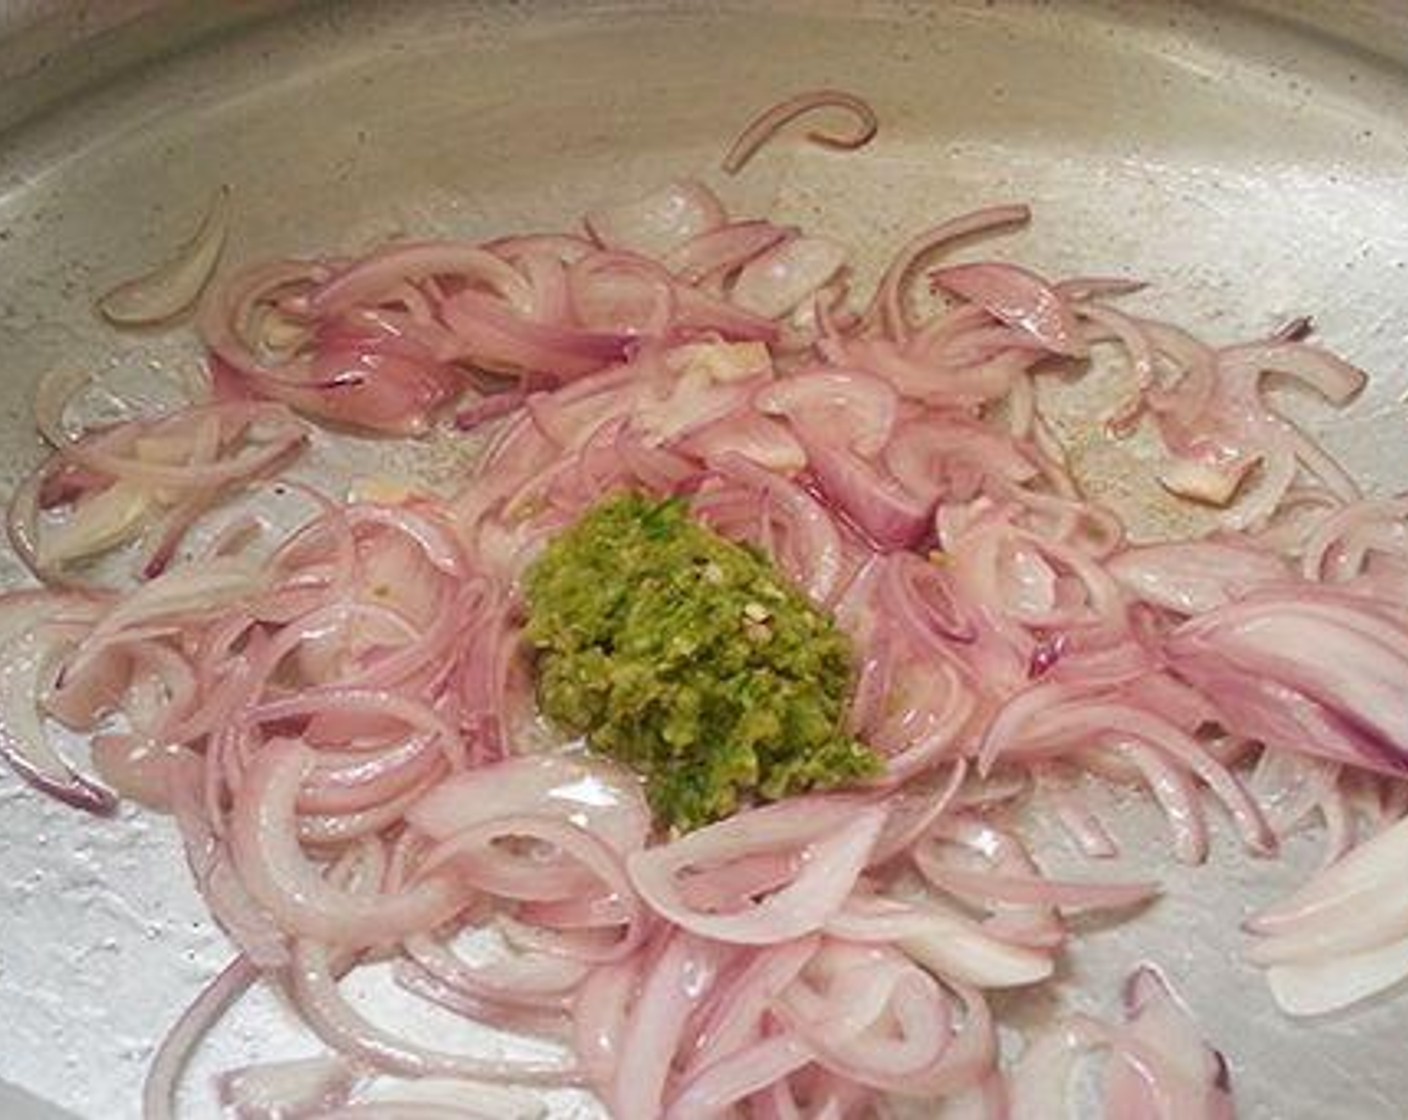 step 2 Pour Coconut Oil (3 Tbsp) to a pan and add Onion (1) and saute till onion becomes soft. Then add Fresh Ginger (1), Garlic (4 cloves), Green Chili Peppers (2) and saute for a good 4 to 5 minutes in low flame.